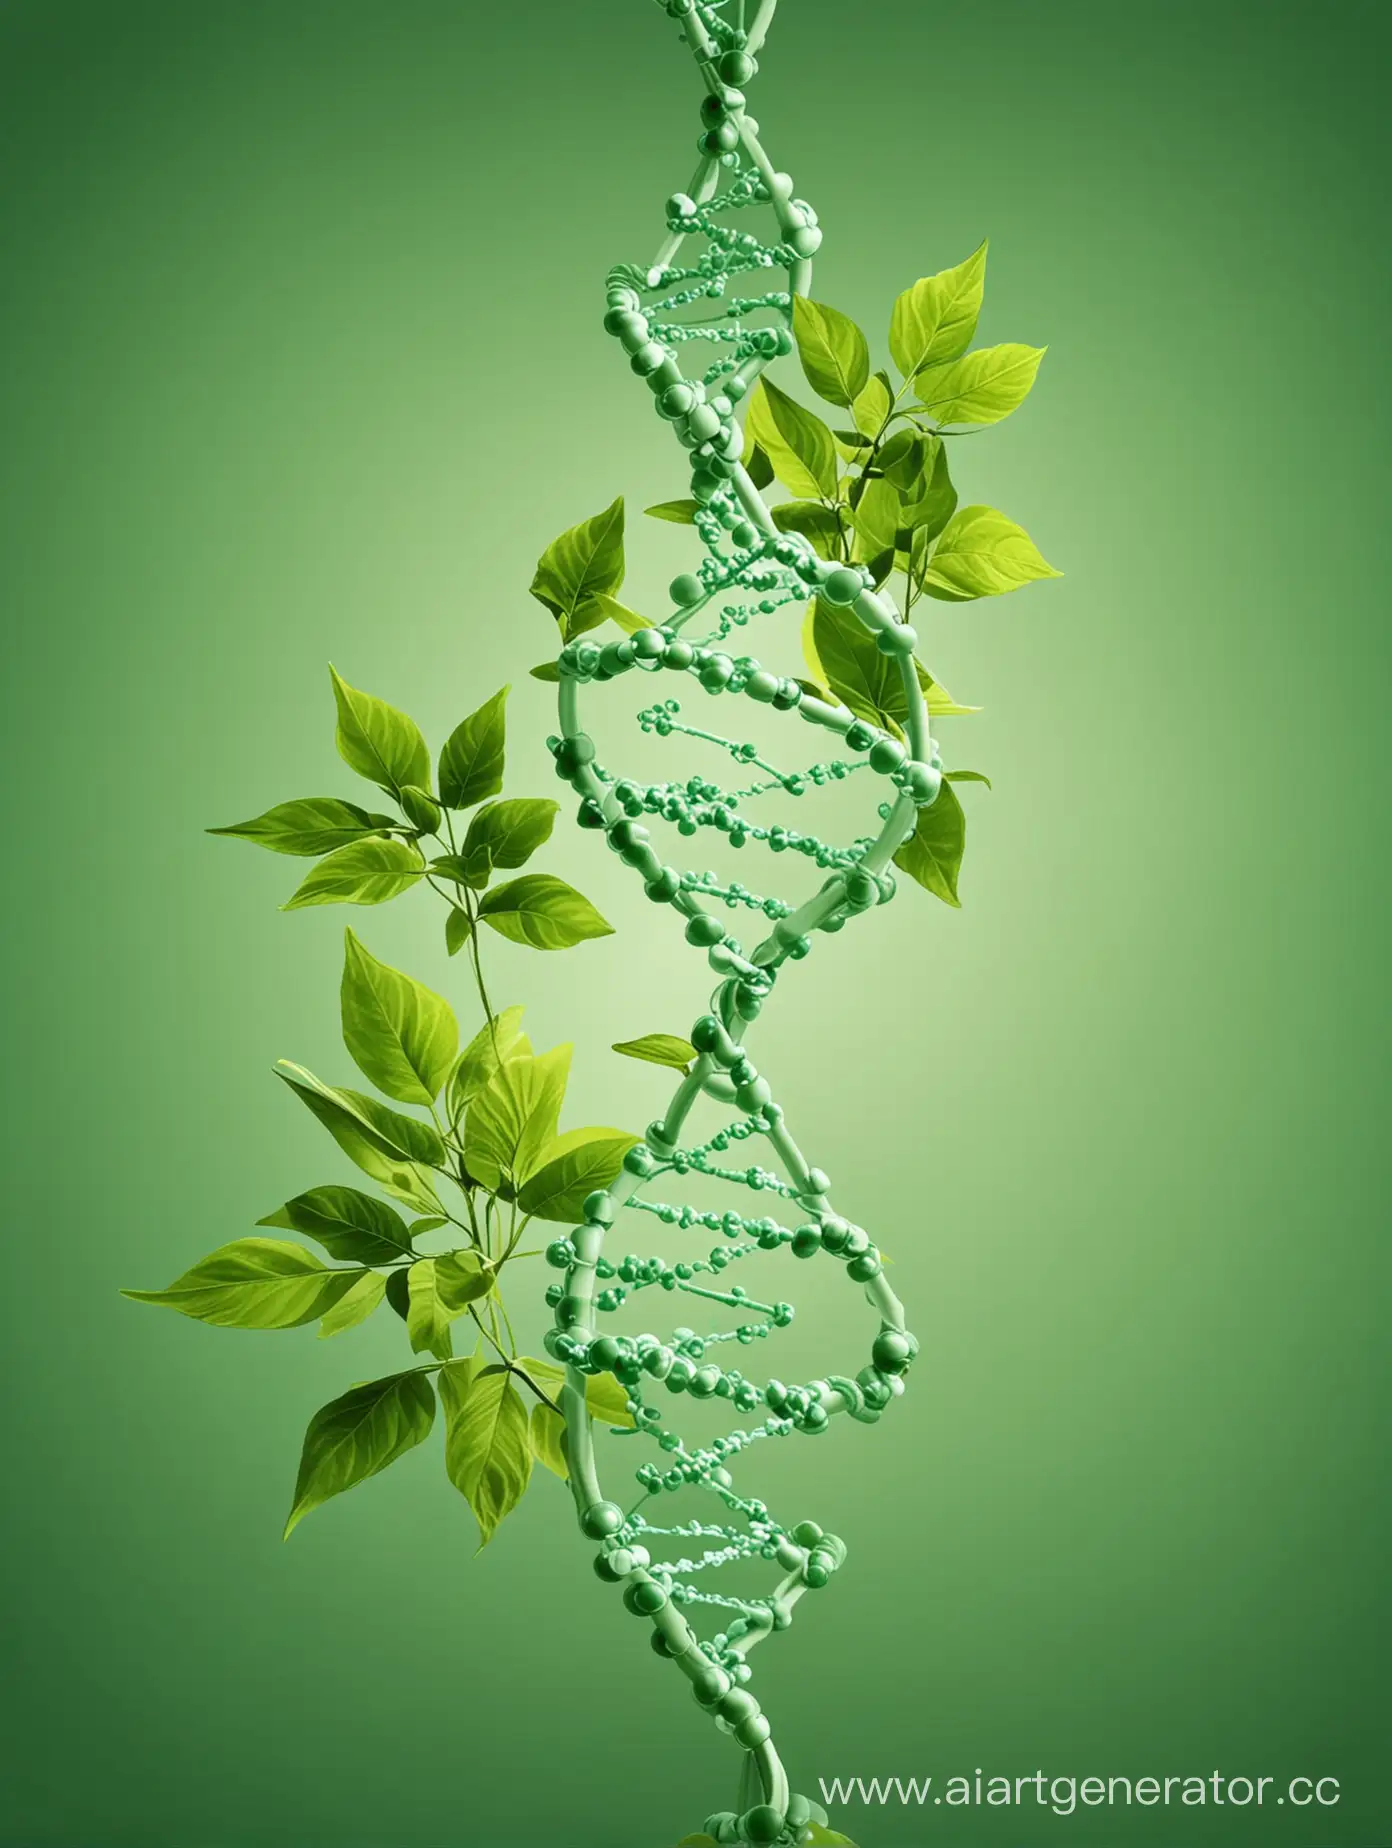 DNA-Molecule-Connected-to-Plant-on-Vibrant-Green-Background